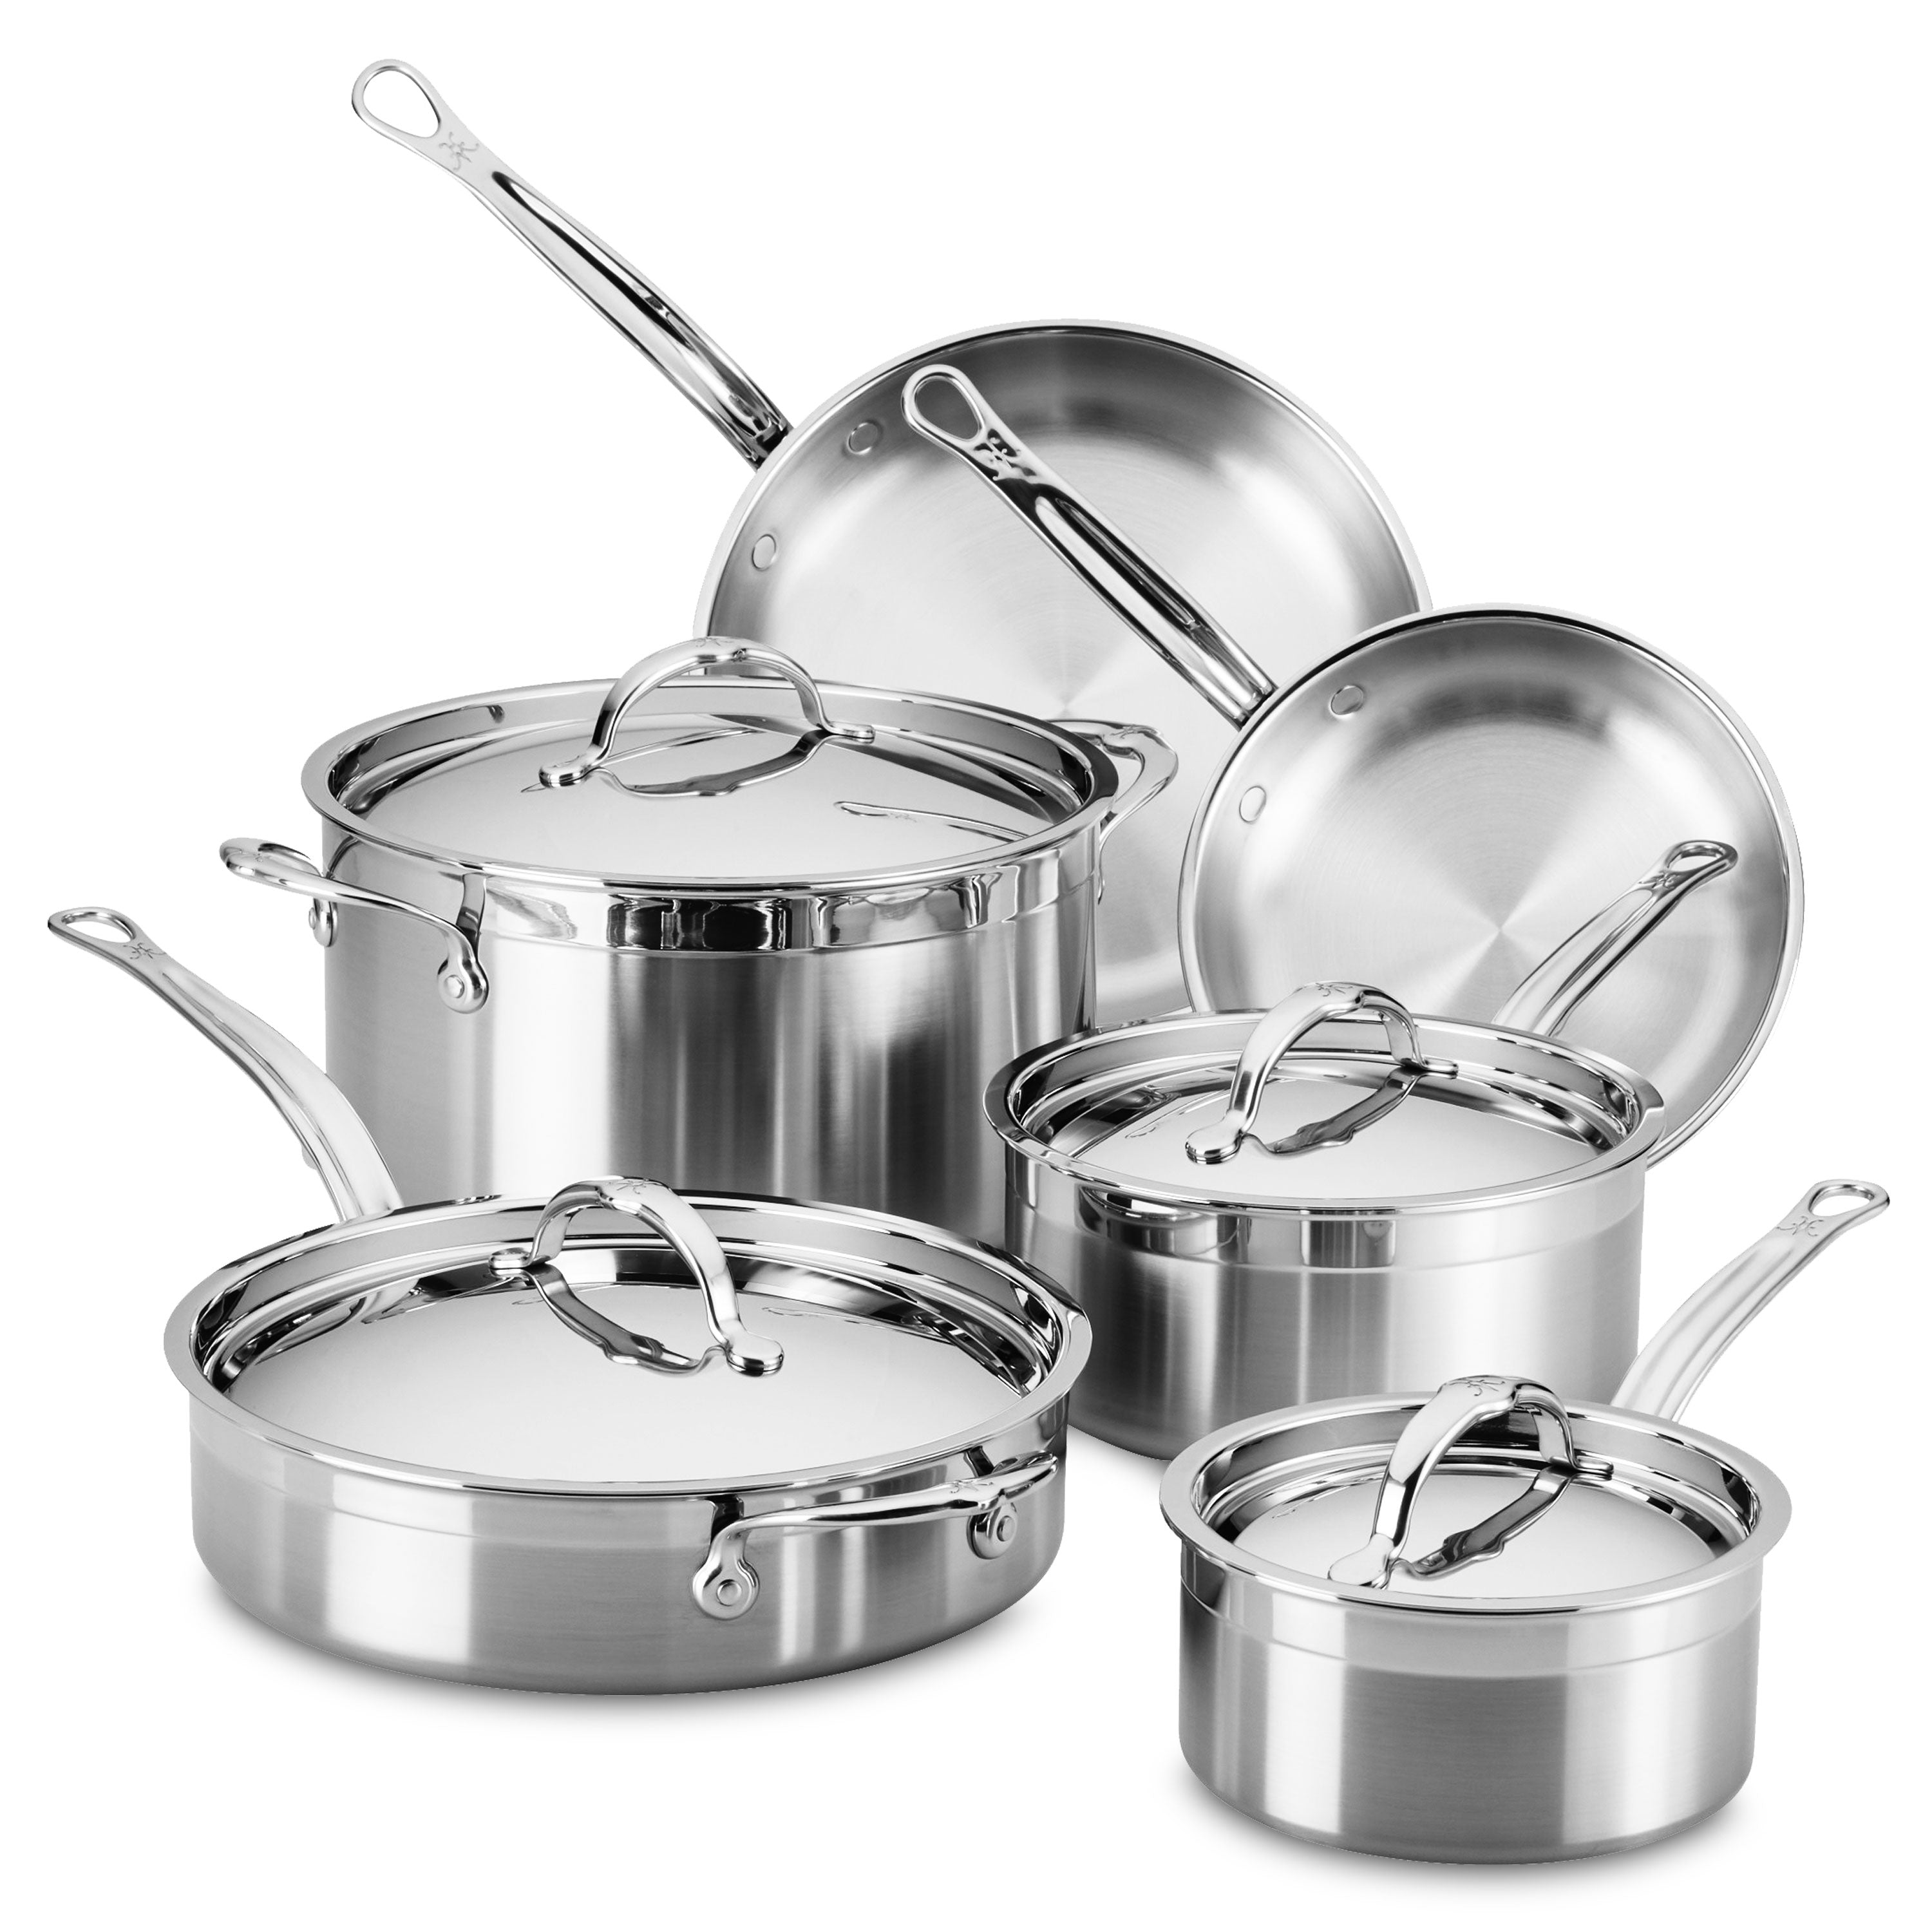 Hestan ProBond Professional Clad Stainless Steel Ultimate 10-Piece Set -  Stainless Steel - 7 requests